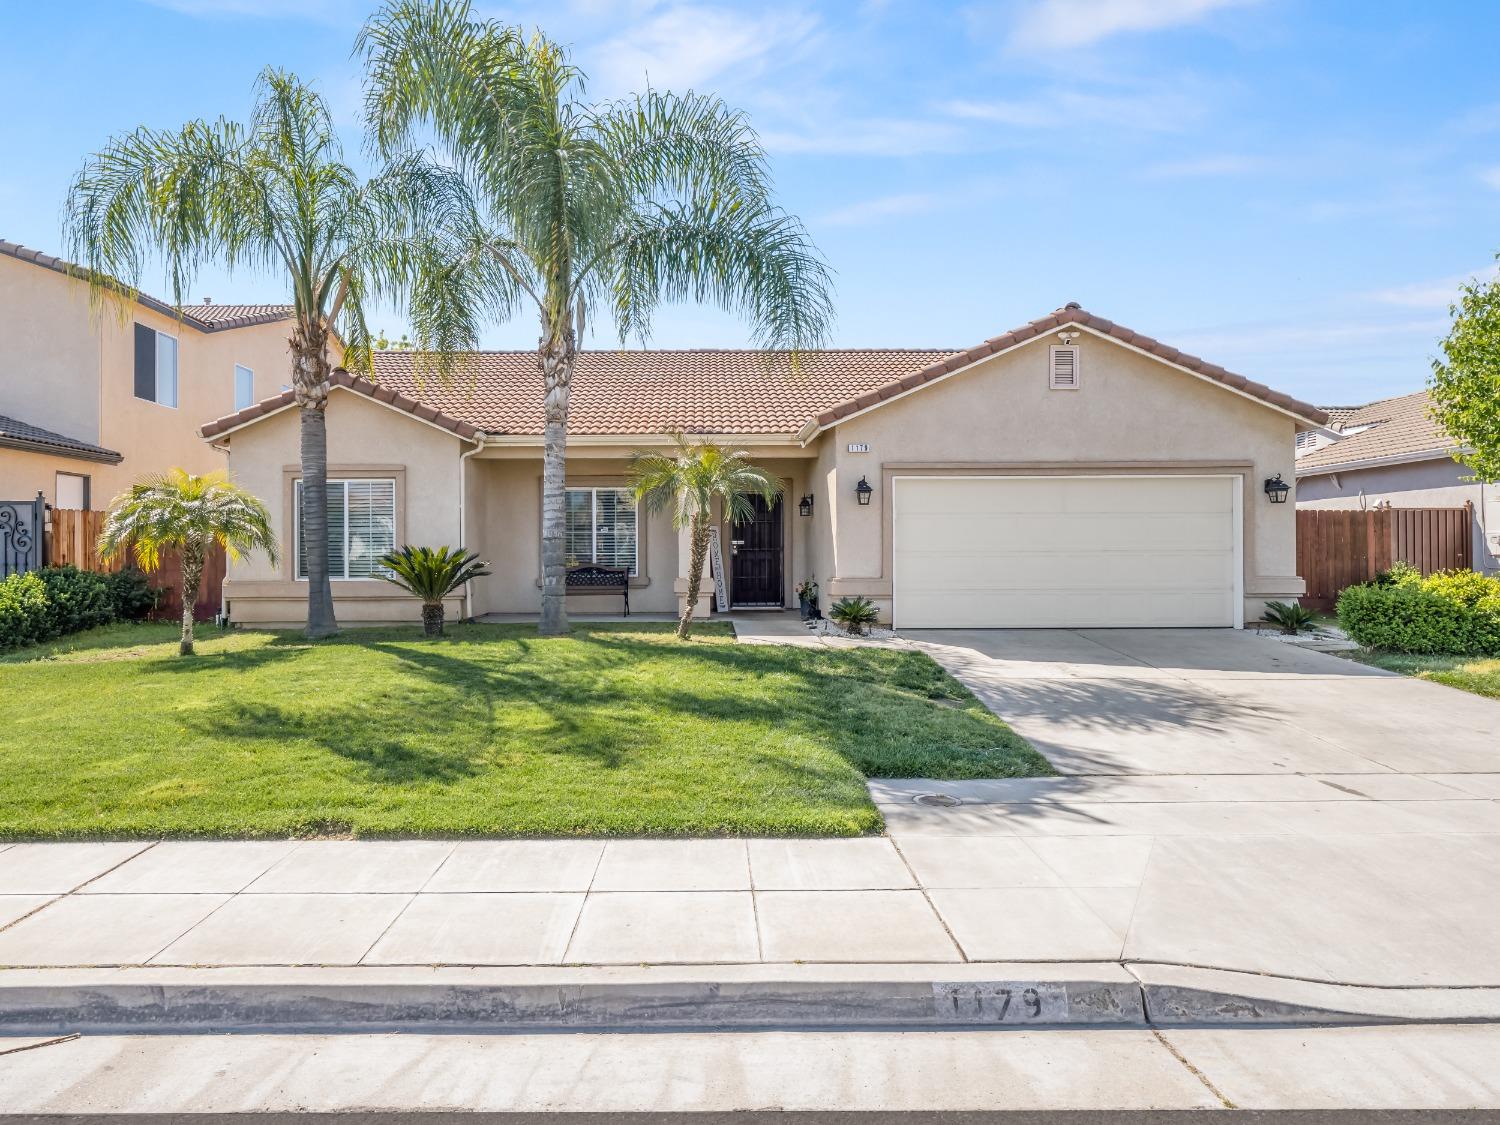 Photo of 1179 W Jameson Ave in Fowler, CA